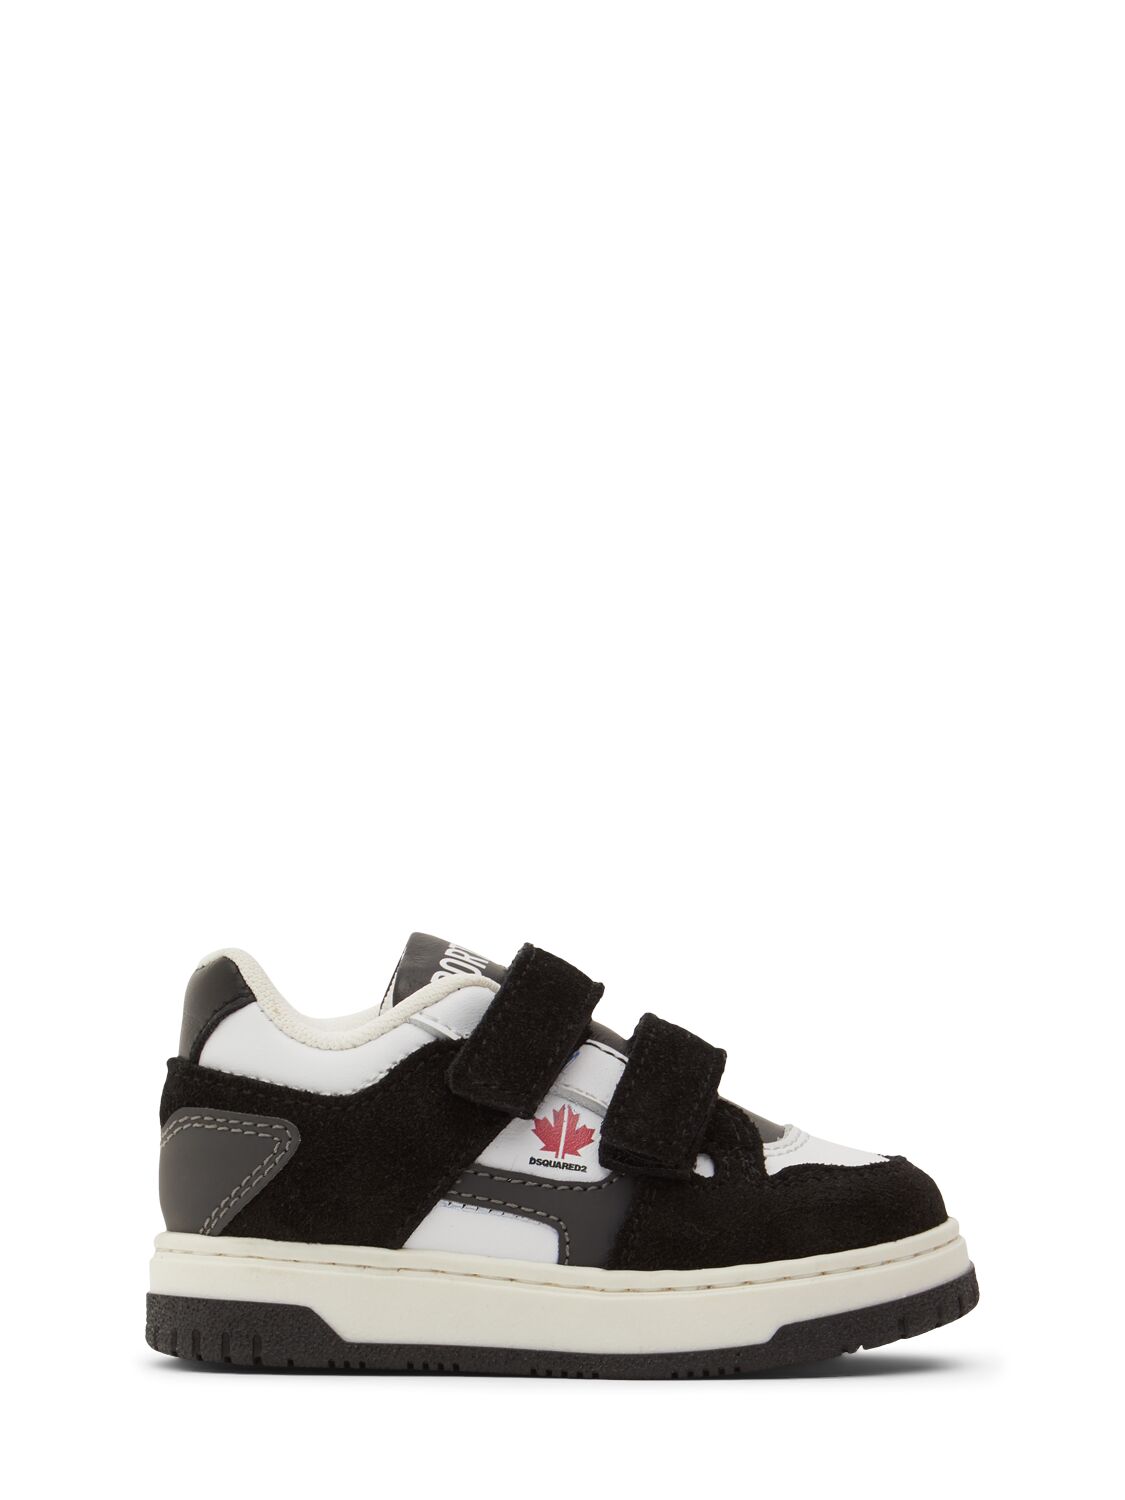 Dsquared2 Printed Leather Strap Sneakers In Black